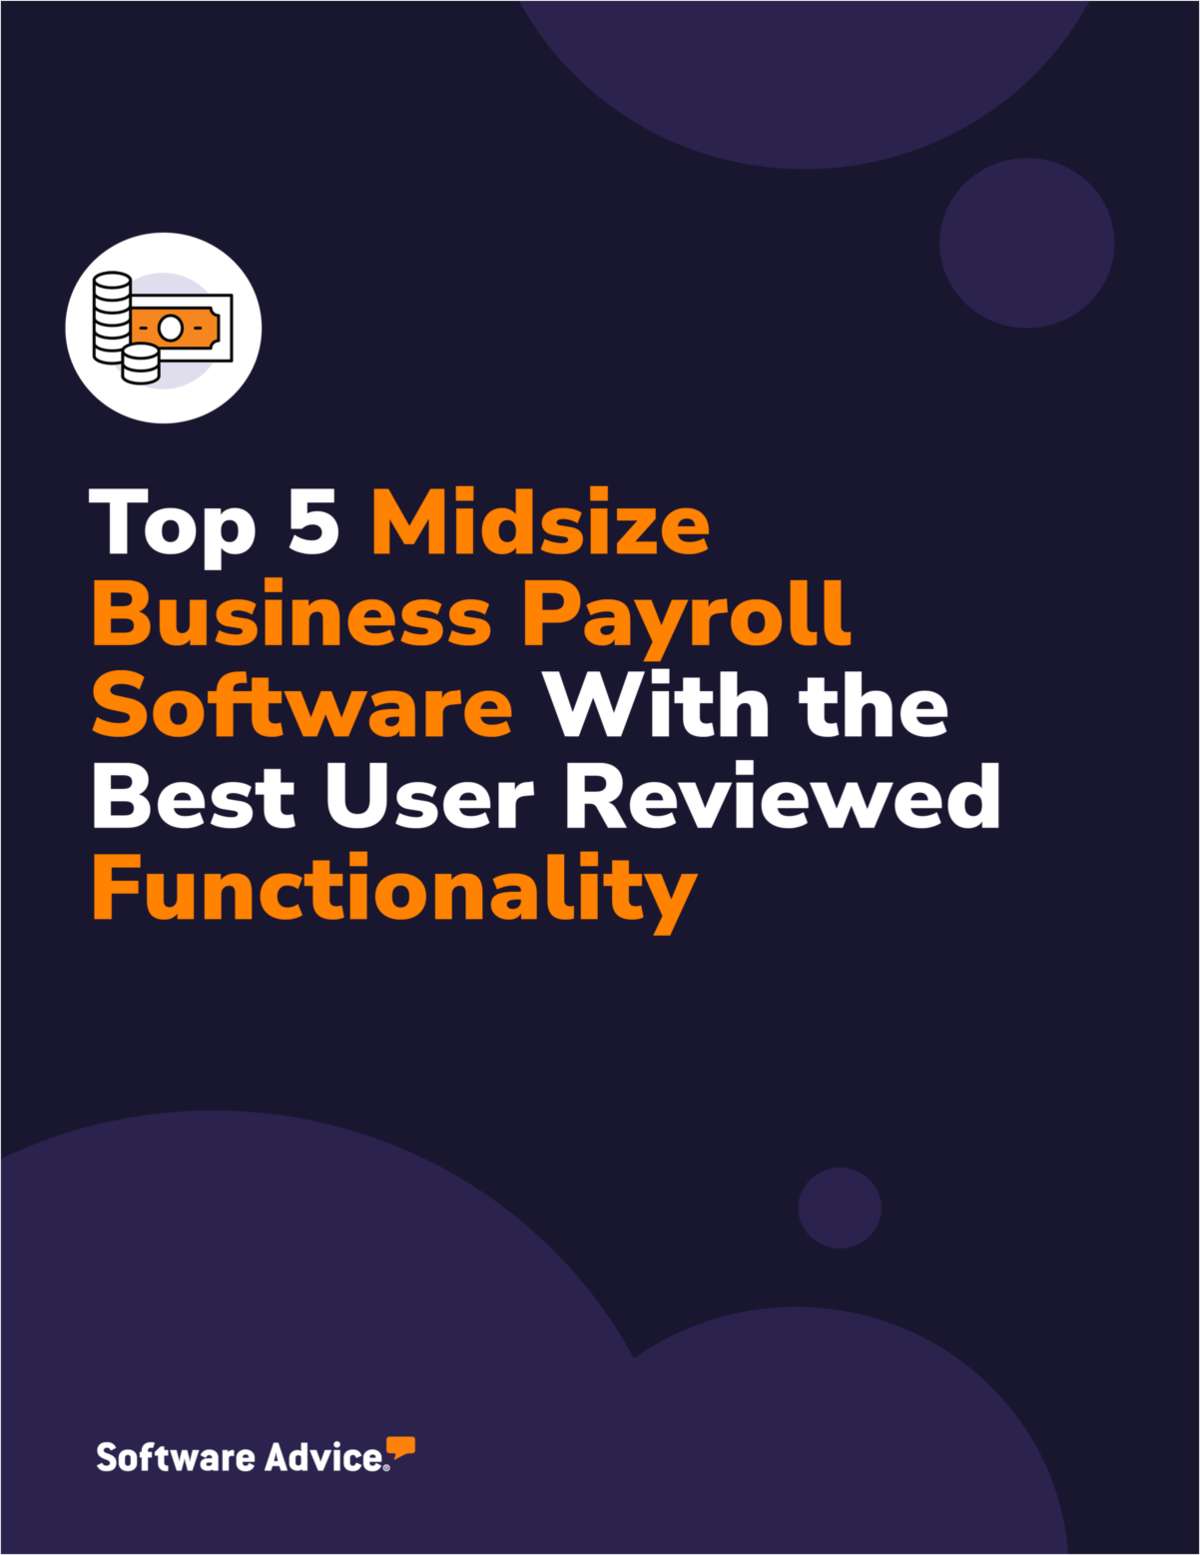 Top 5 Midsize Business Payroll Software With the Best User Reviewed Functionality